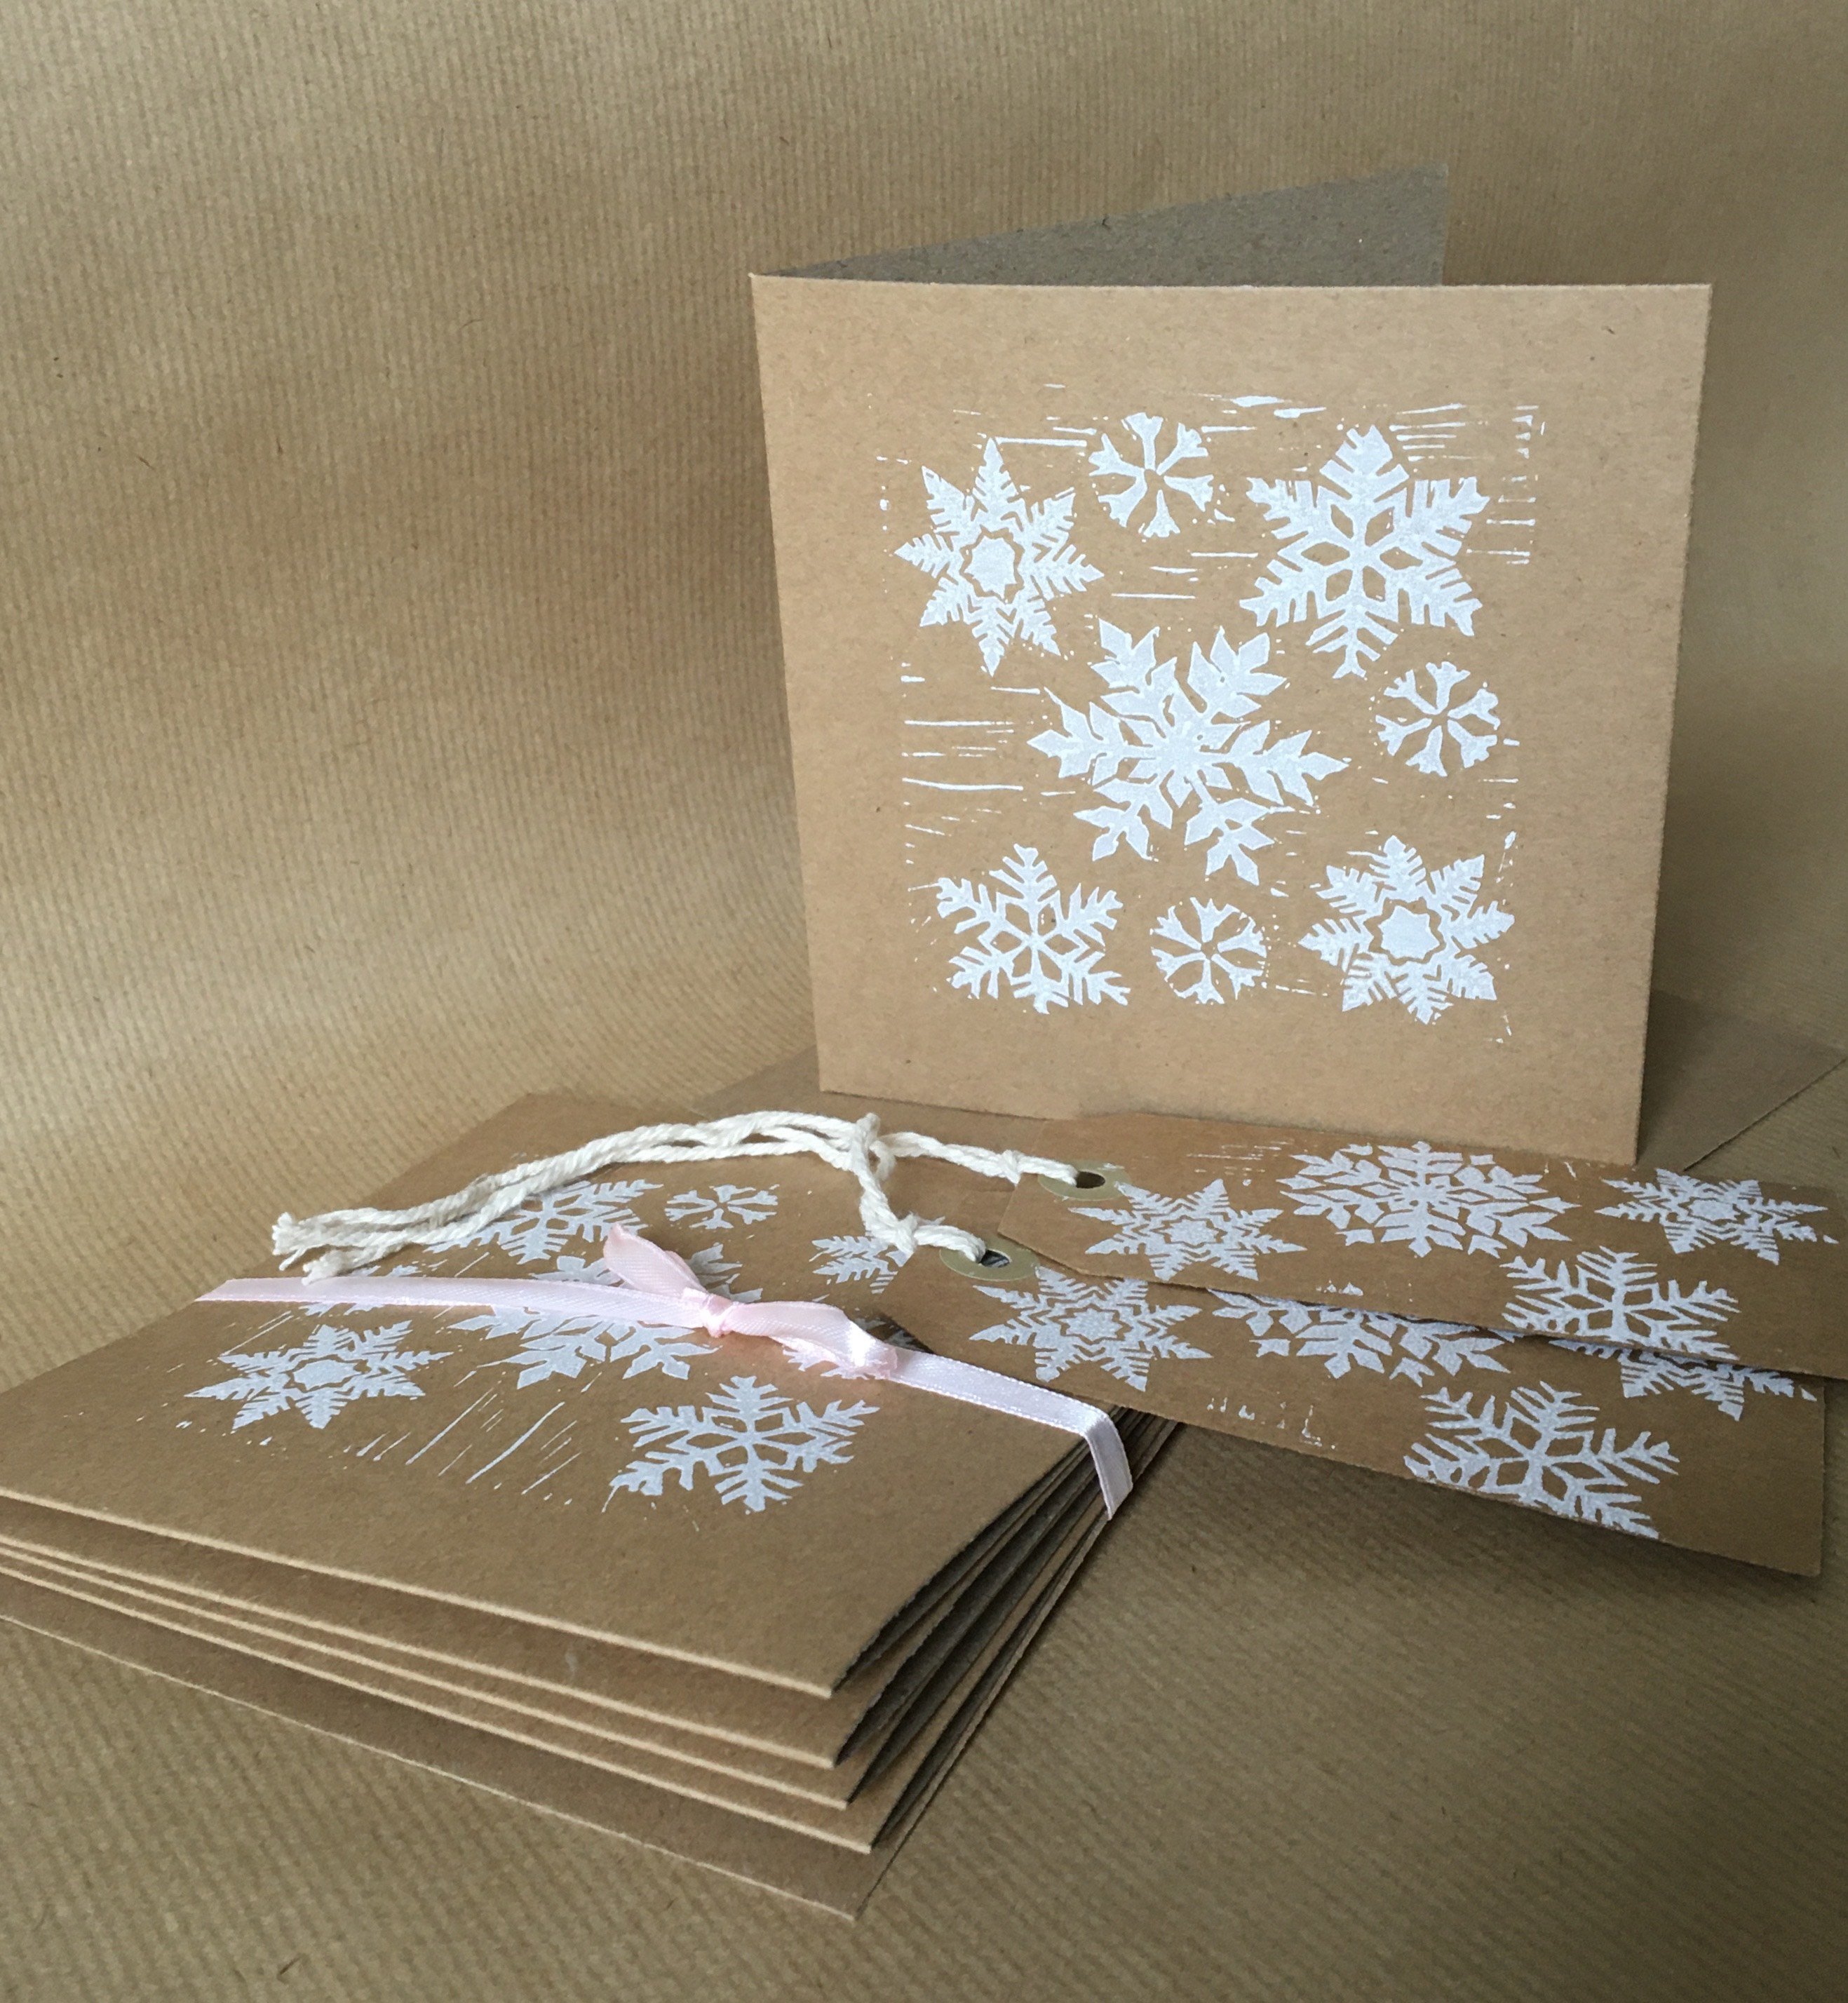 Lino print your own cards and gift tags